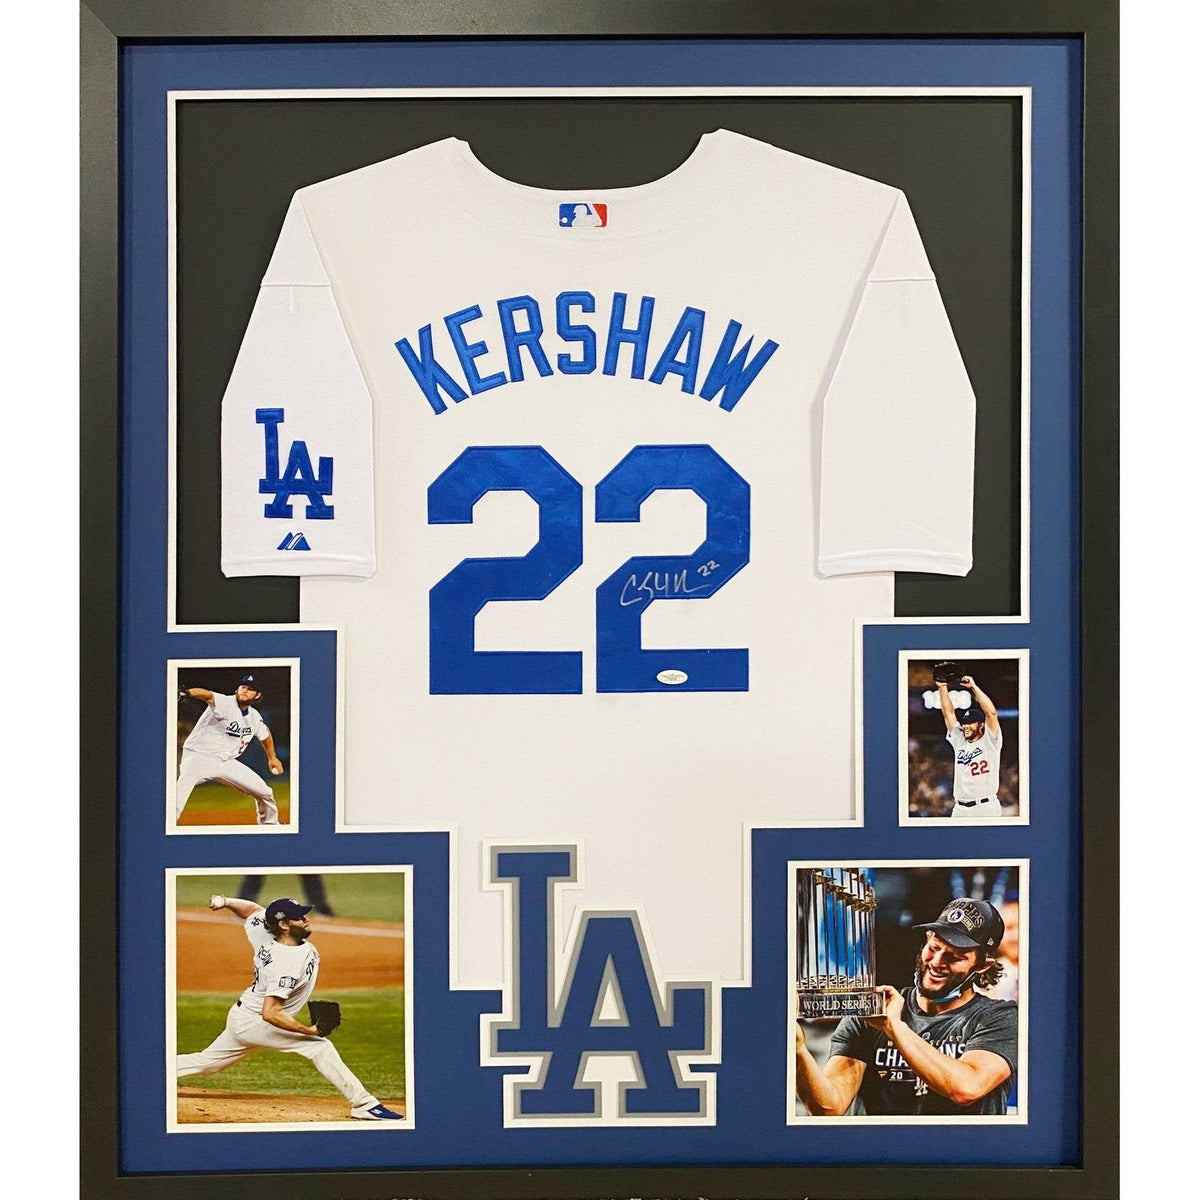 Clayton Kershaw Signed Framed Jersey Beckett Autographed LA Dodgers L.A.